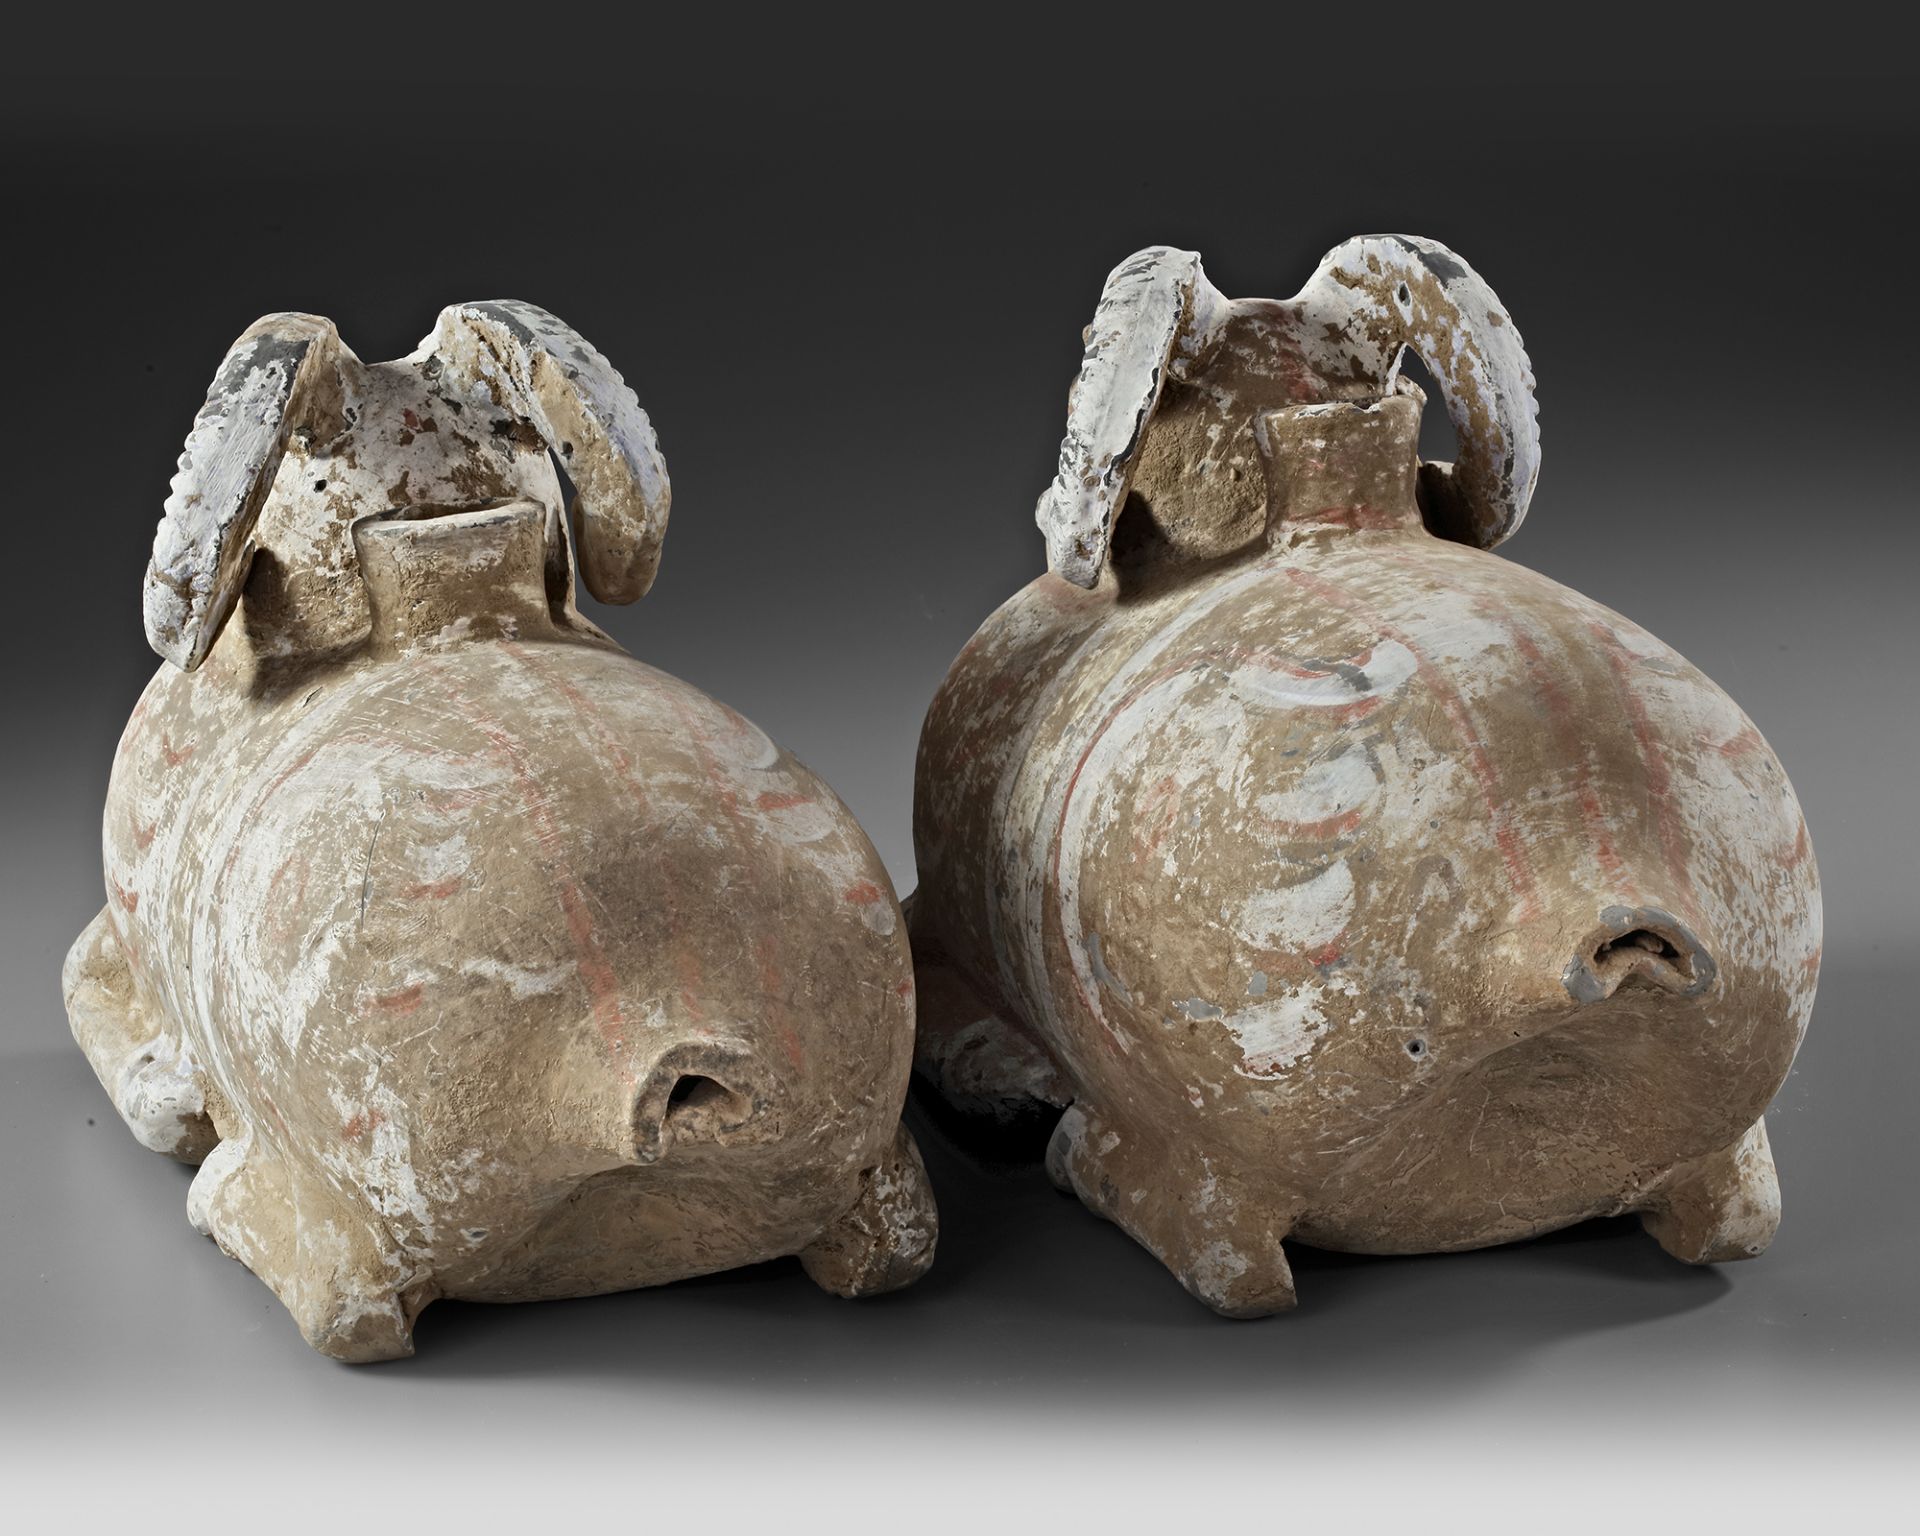 A PAIR OF TERRACOTTA VESSELS IN THE FORM OF A RAM, HAN DYNASTY (206 BC-220 AD) - Image 4 of 6